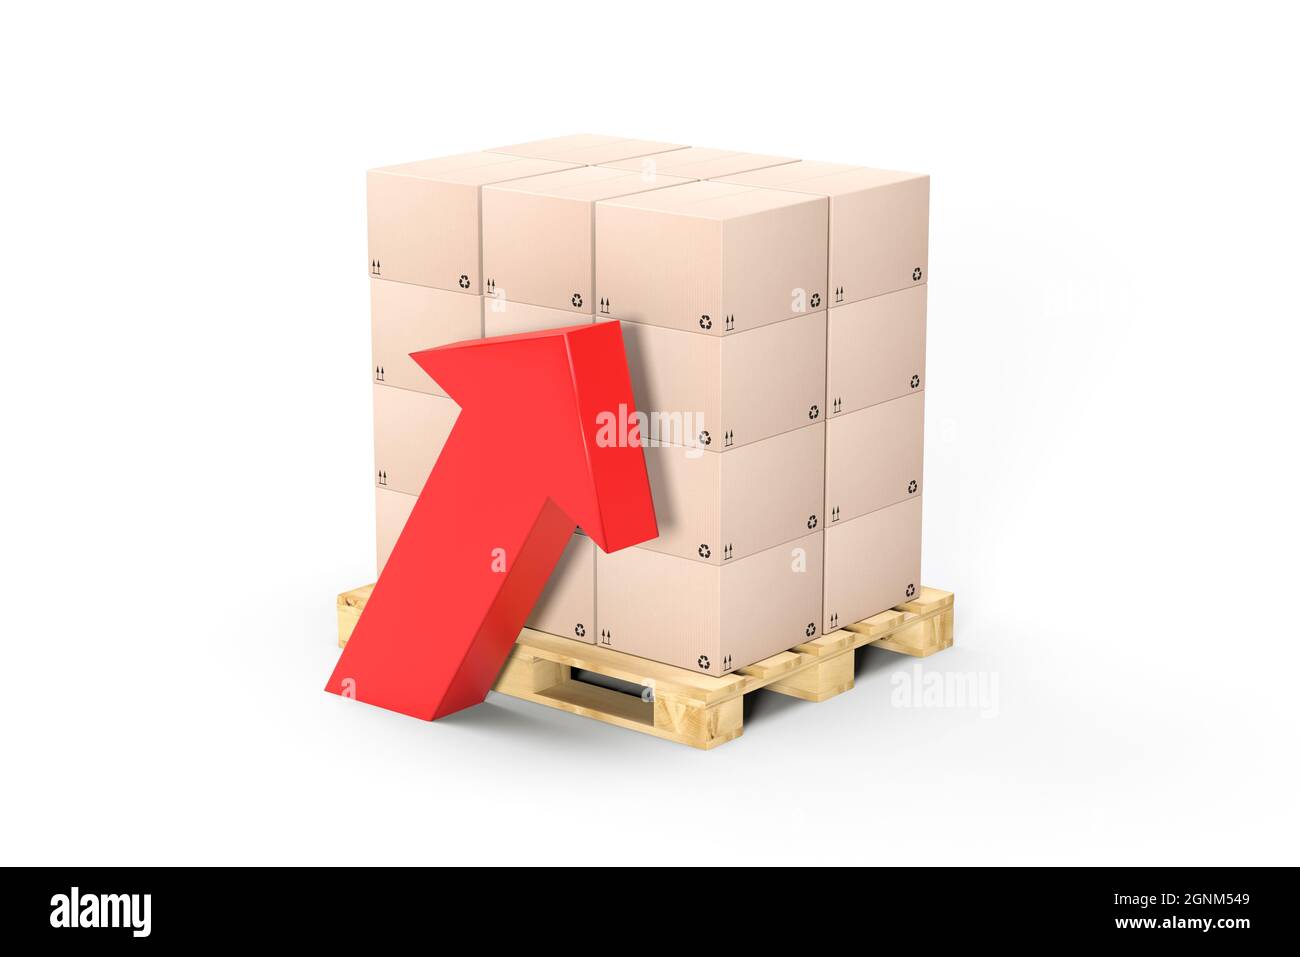 Europe pallet with red arrow to symbolize the rising cost of freight transport - 3D rendering Stock Photo